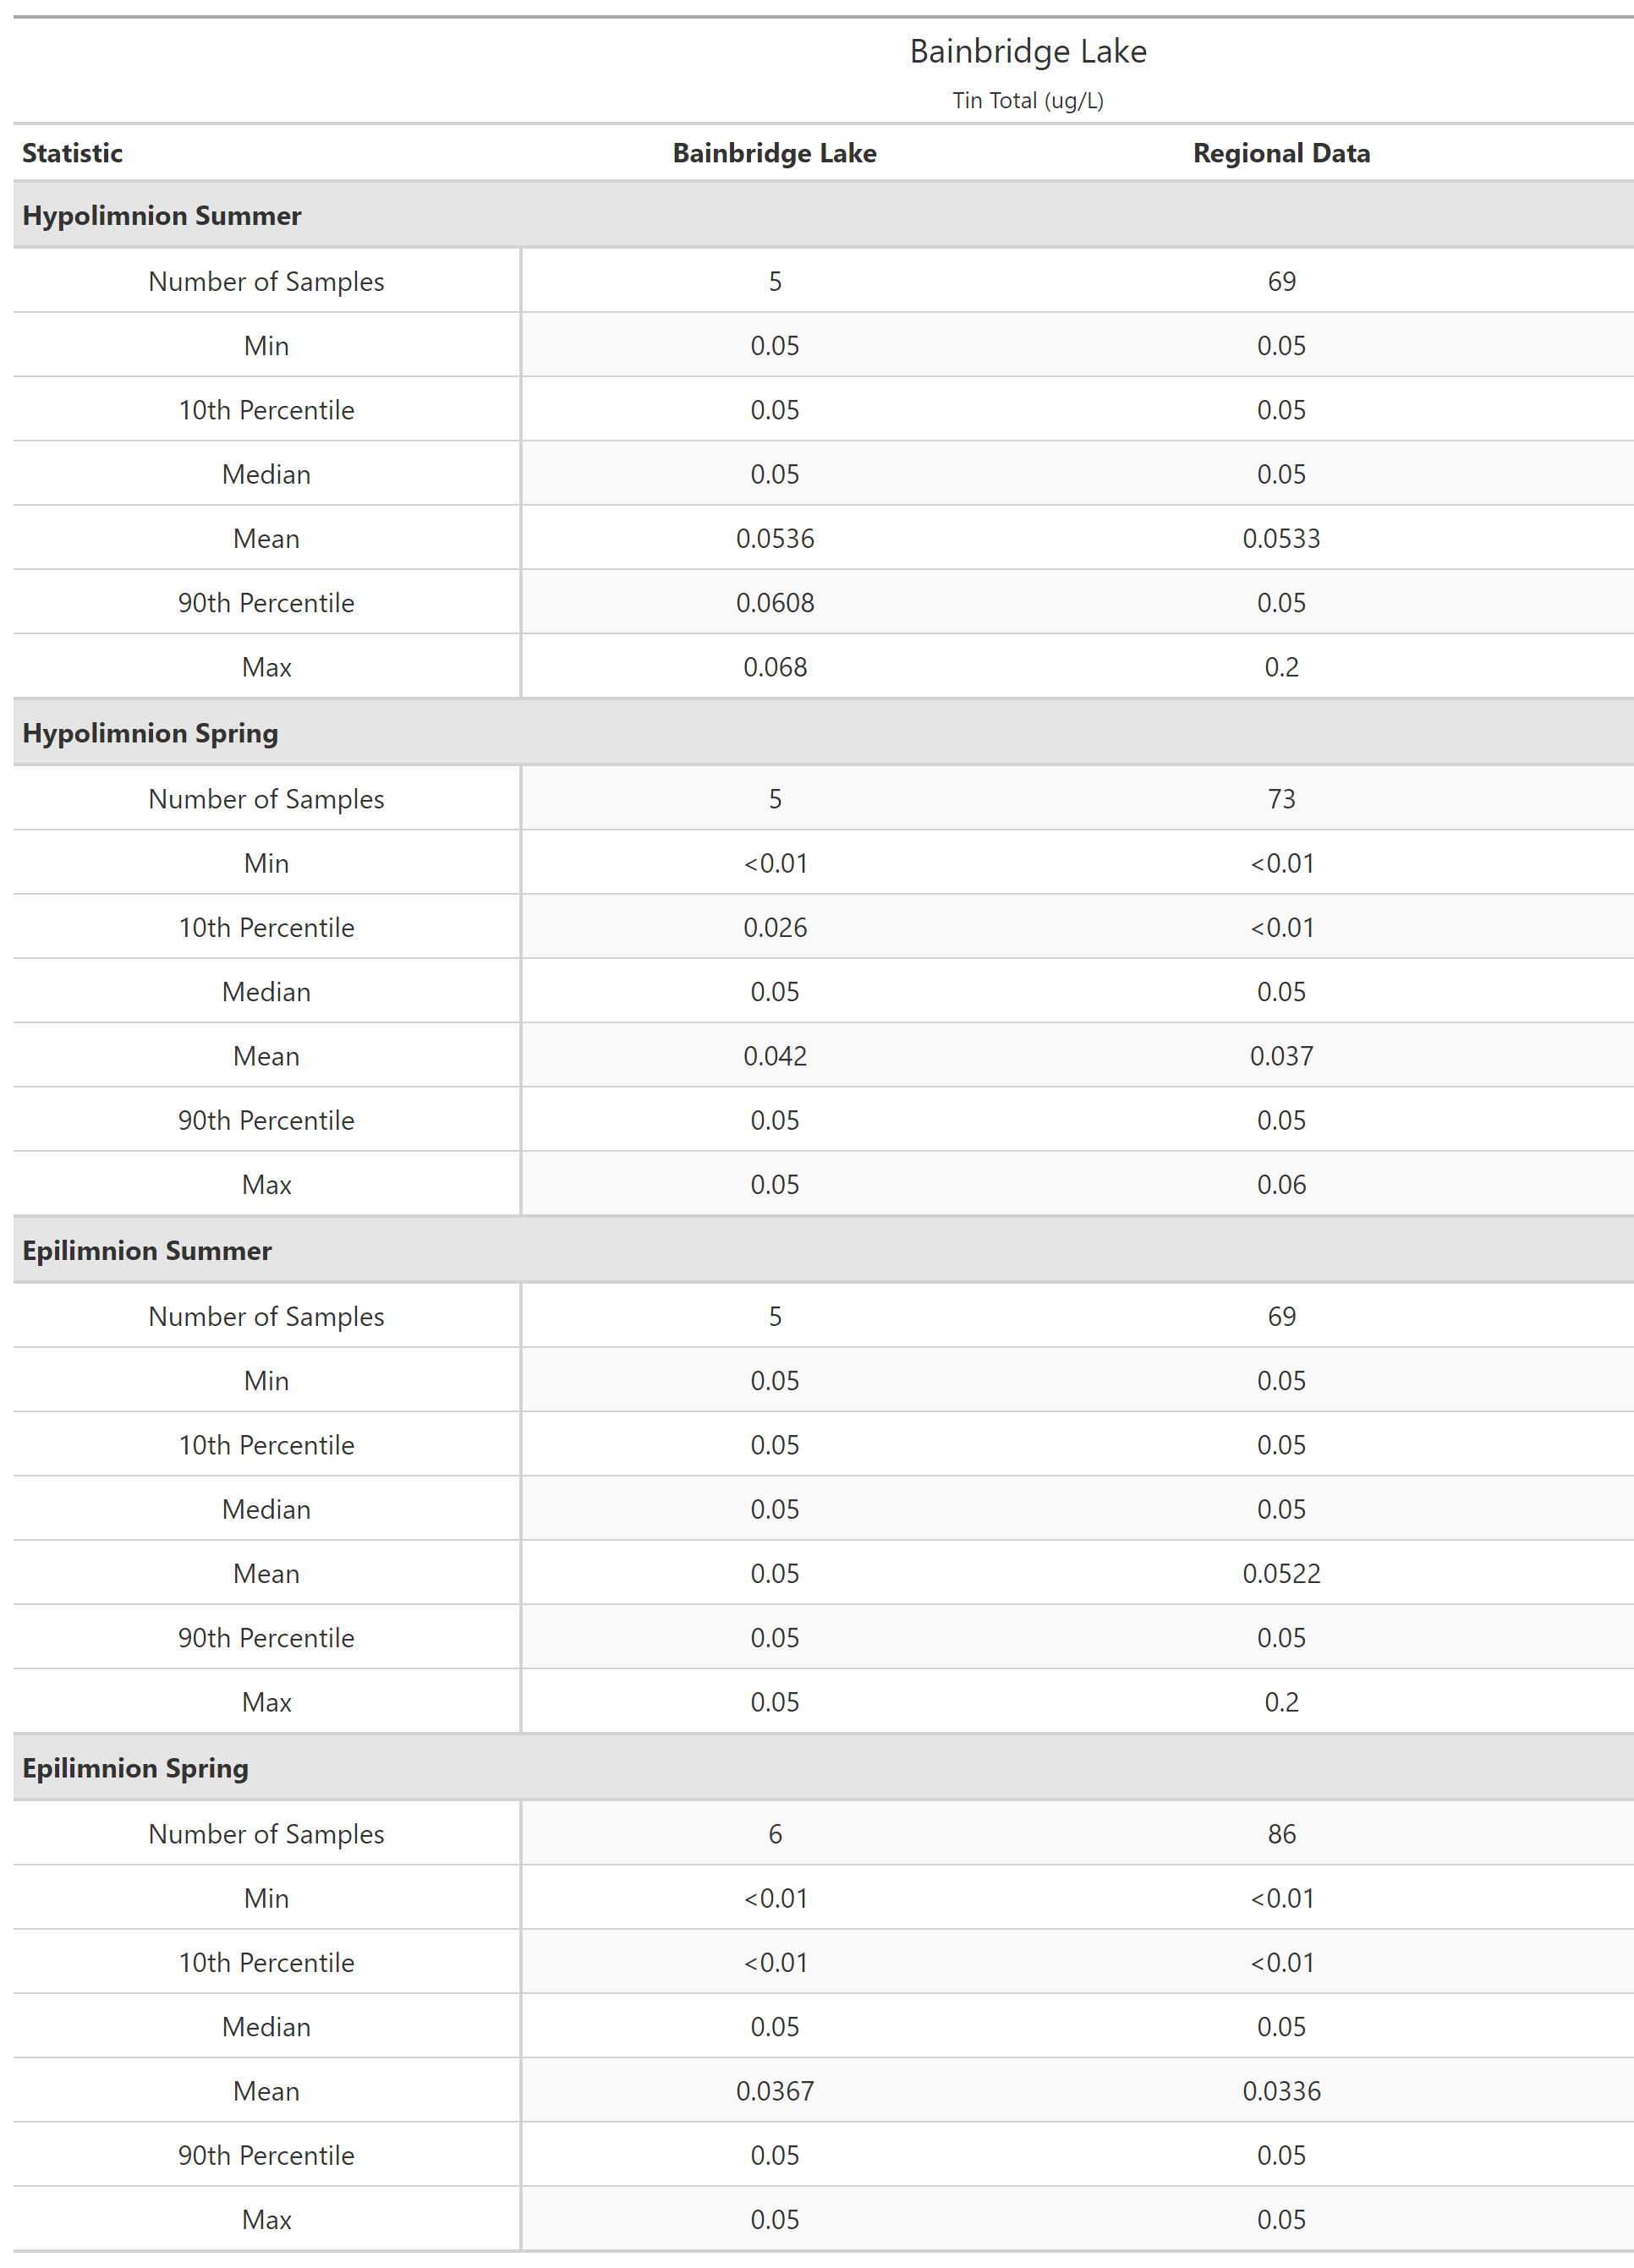 A table of summary statistics for Tin Total with comparison to regional data